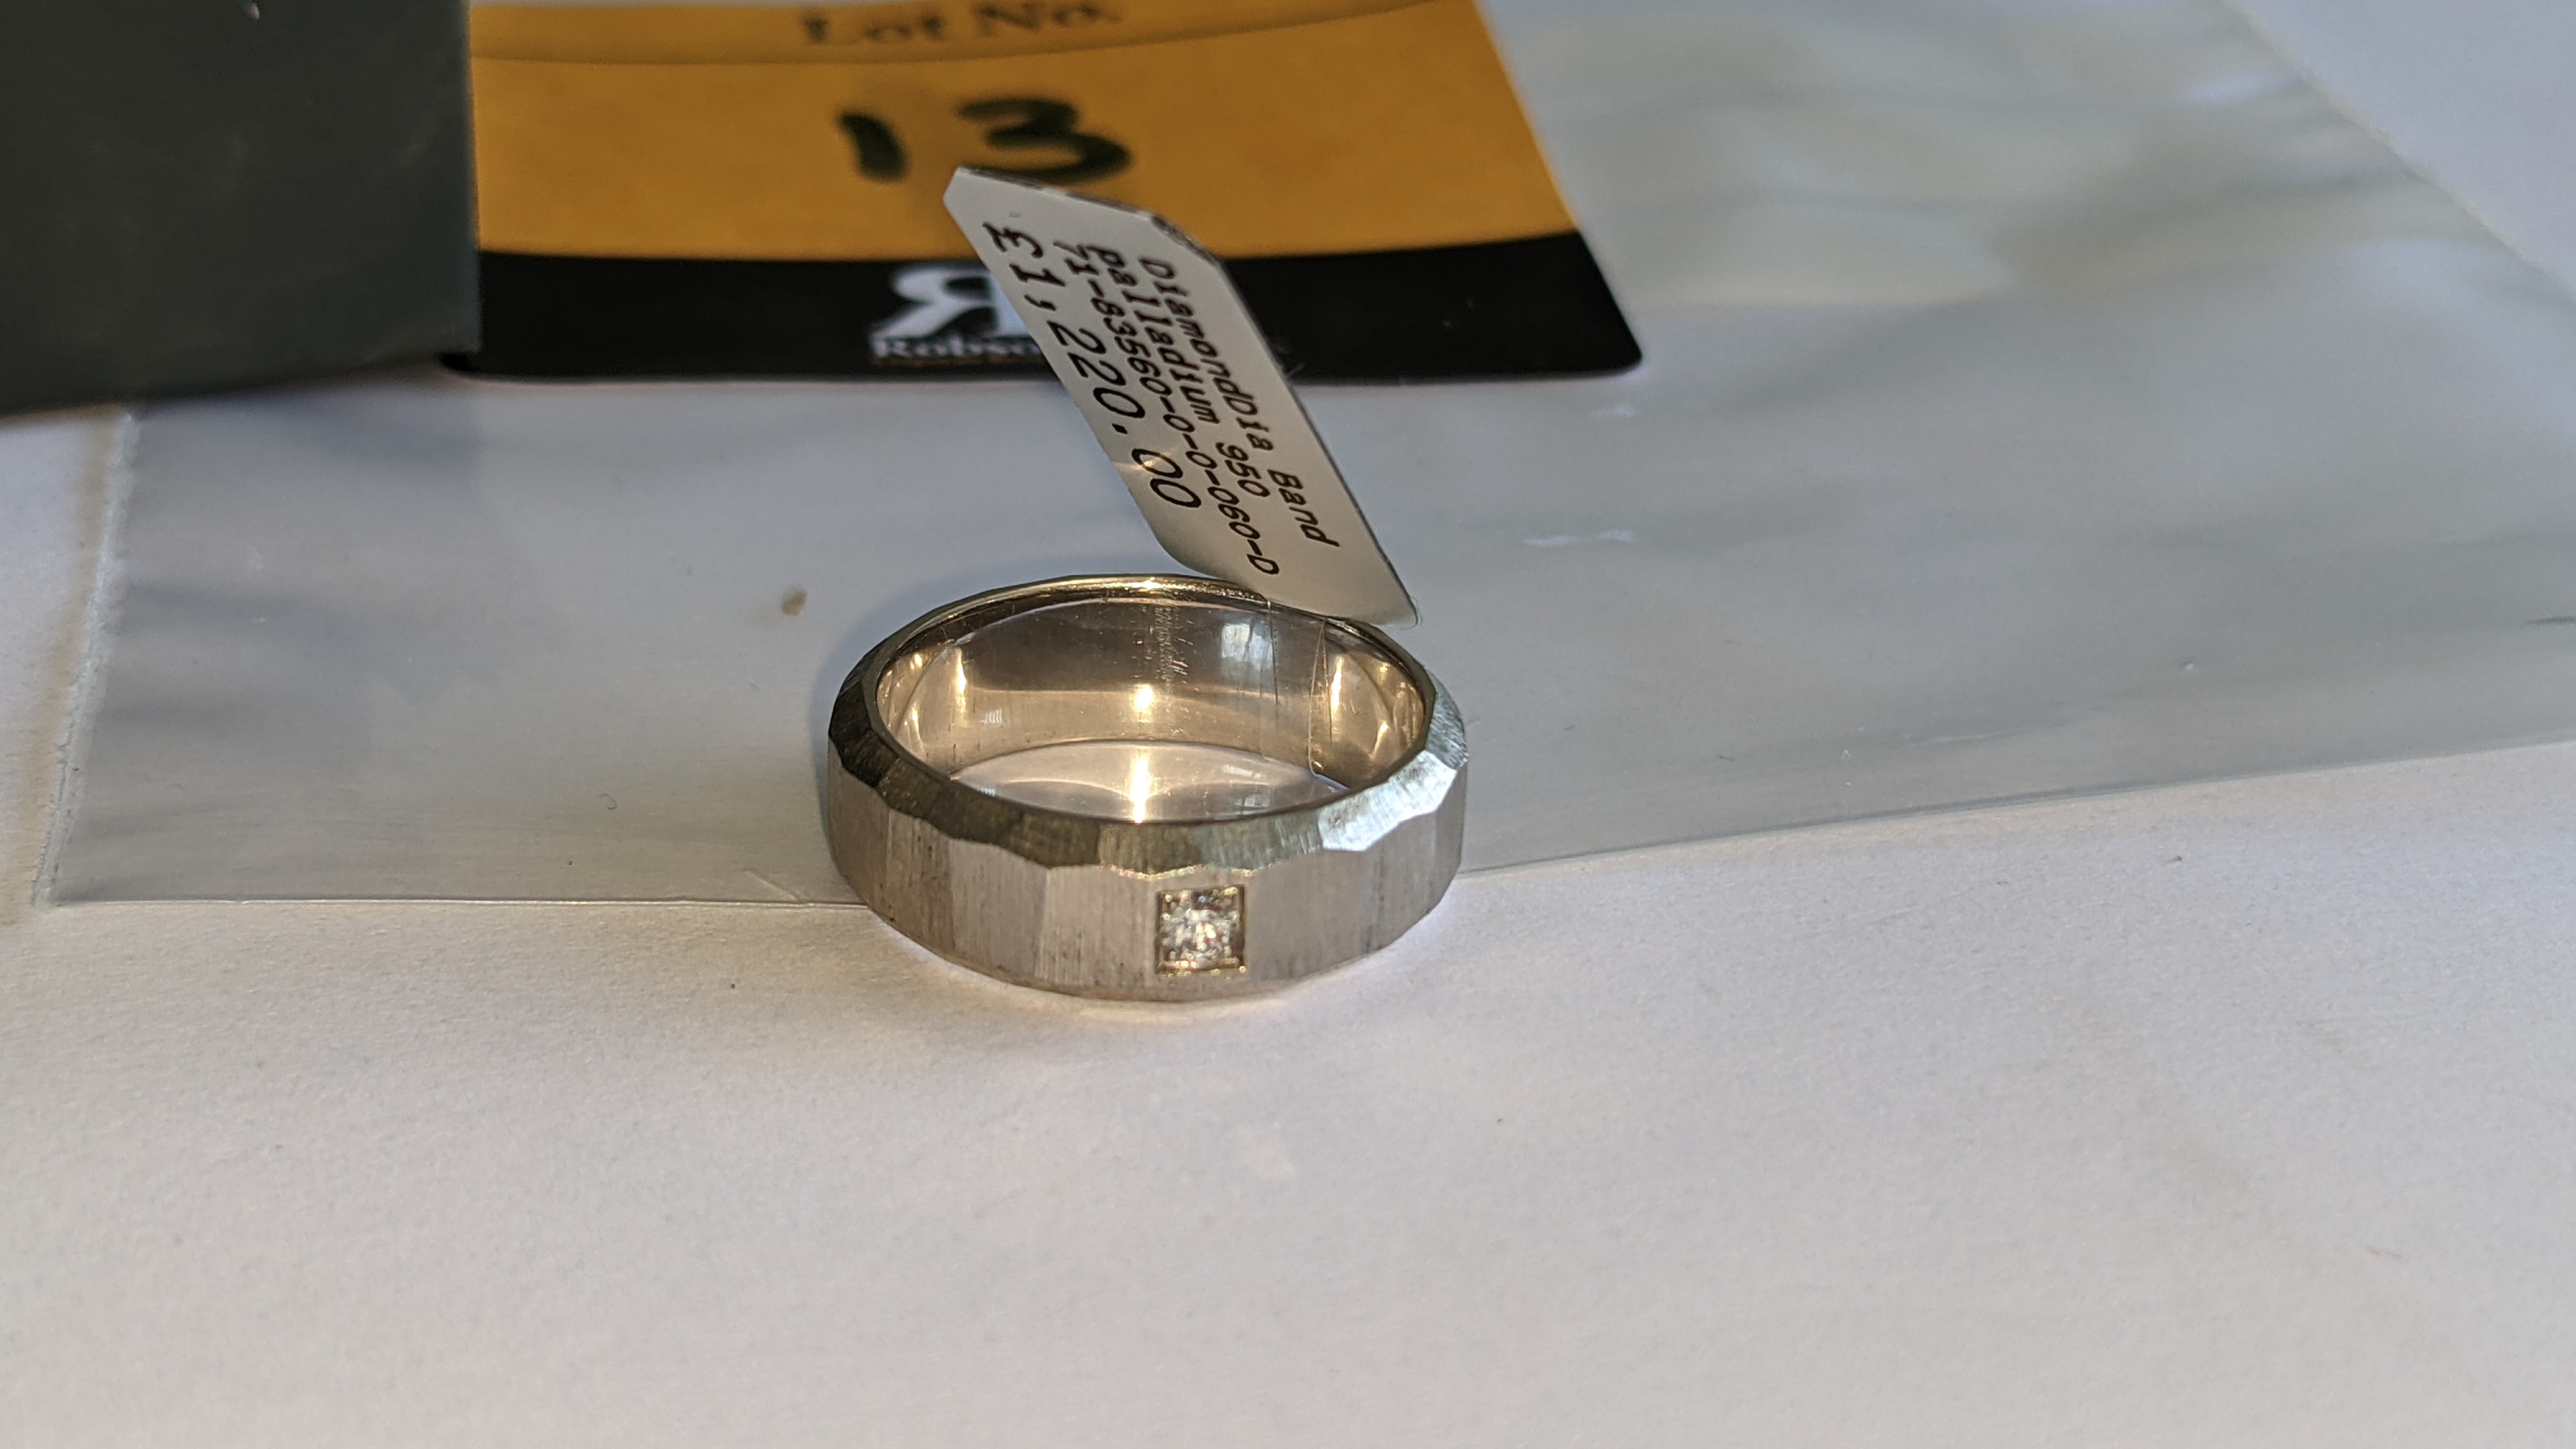 Platinum 950 unusually faceted Palladium 950 ring with single diamond weighing 0.05ct. RRP £1,220 - Image 4 of 15